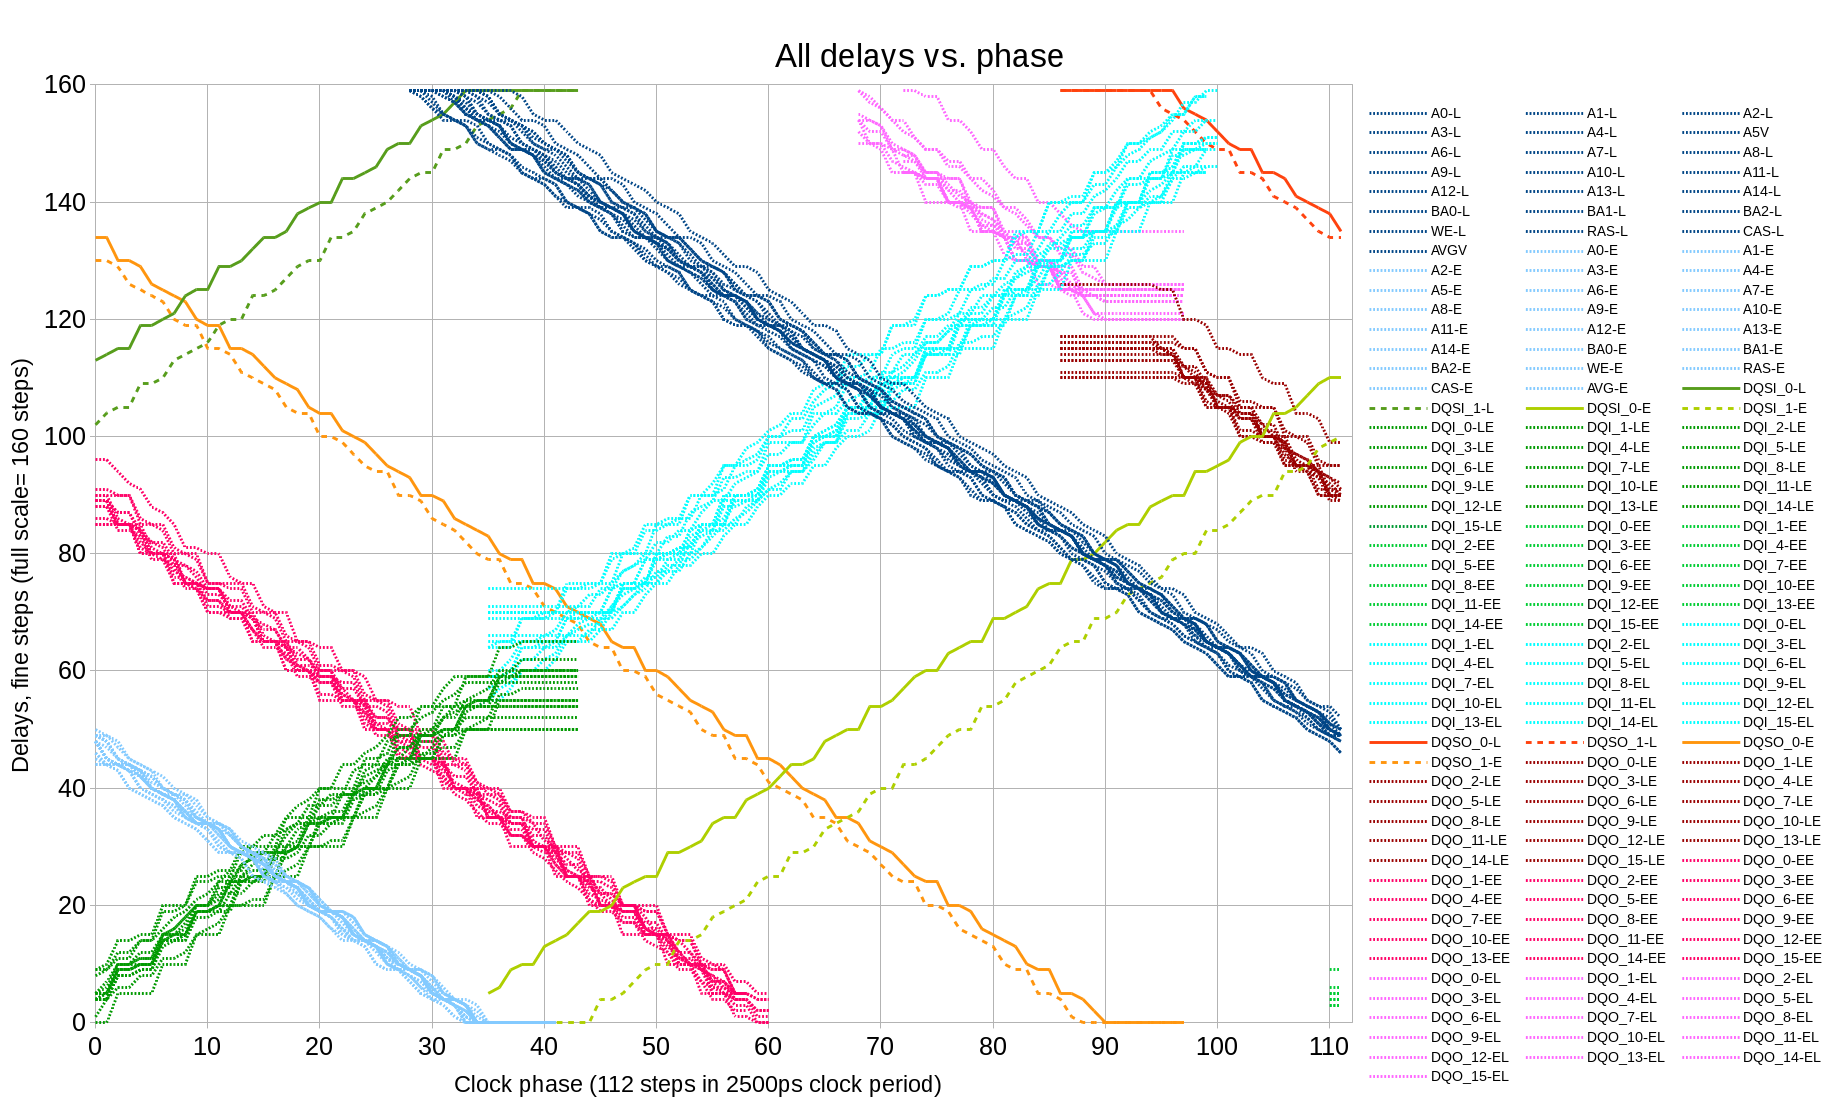 Fig.9 All delays vs. clock phase